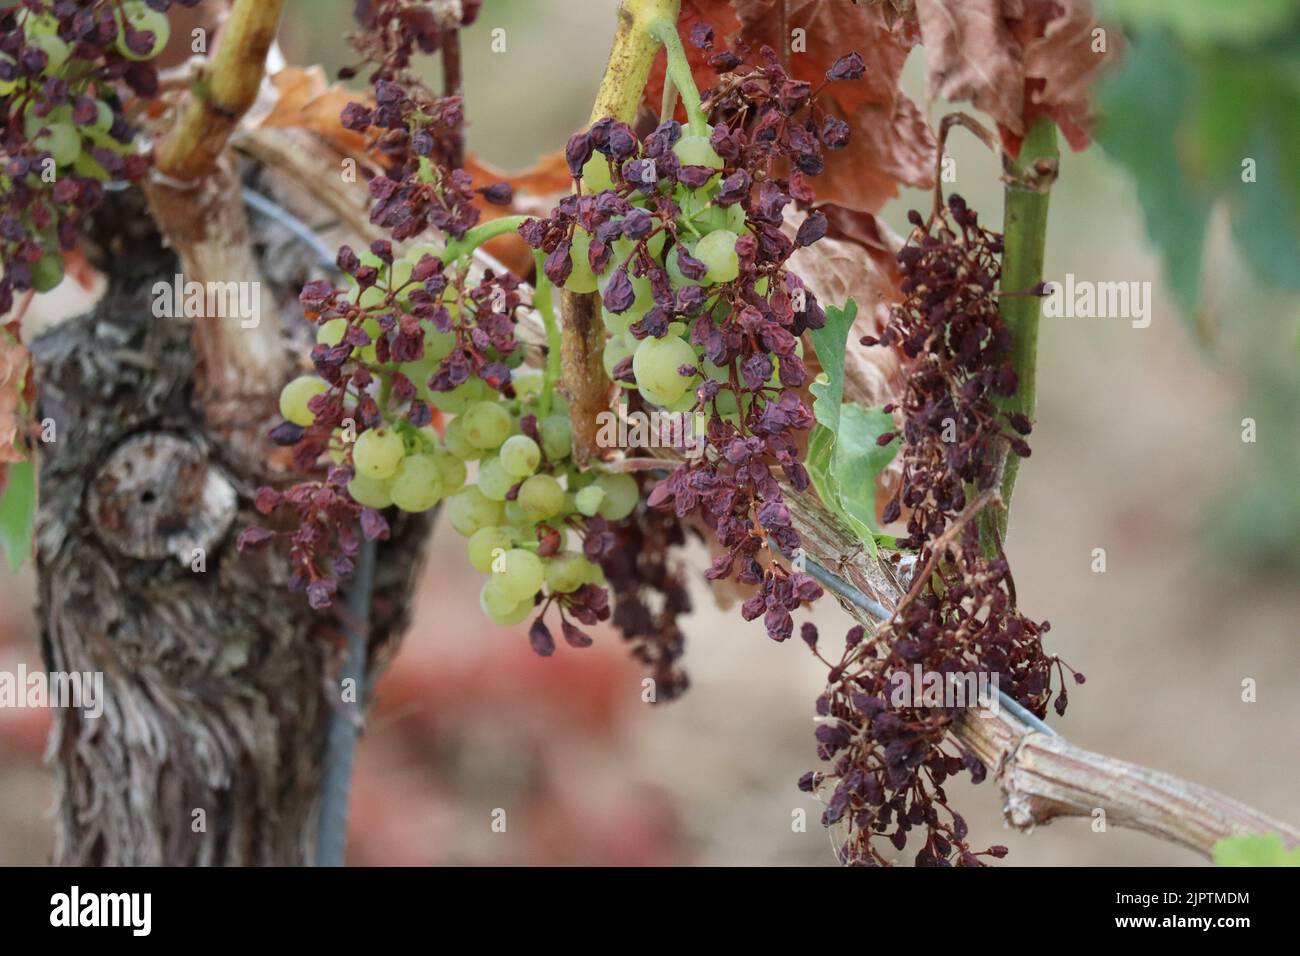 partially withered Grapes on the Vine Stock Photo